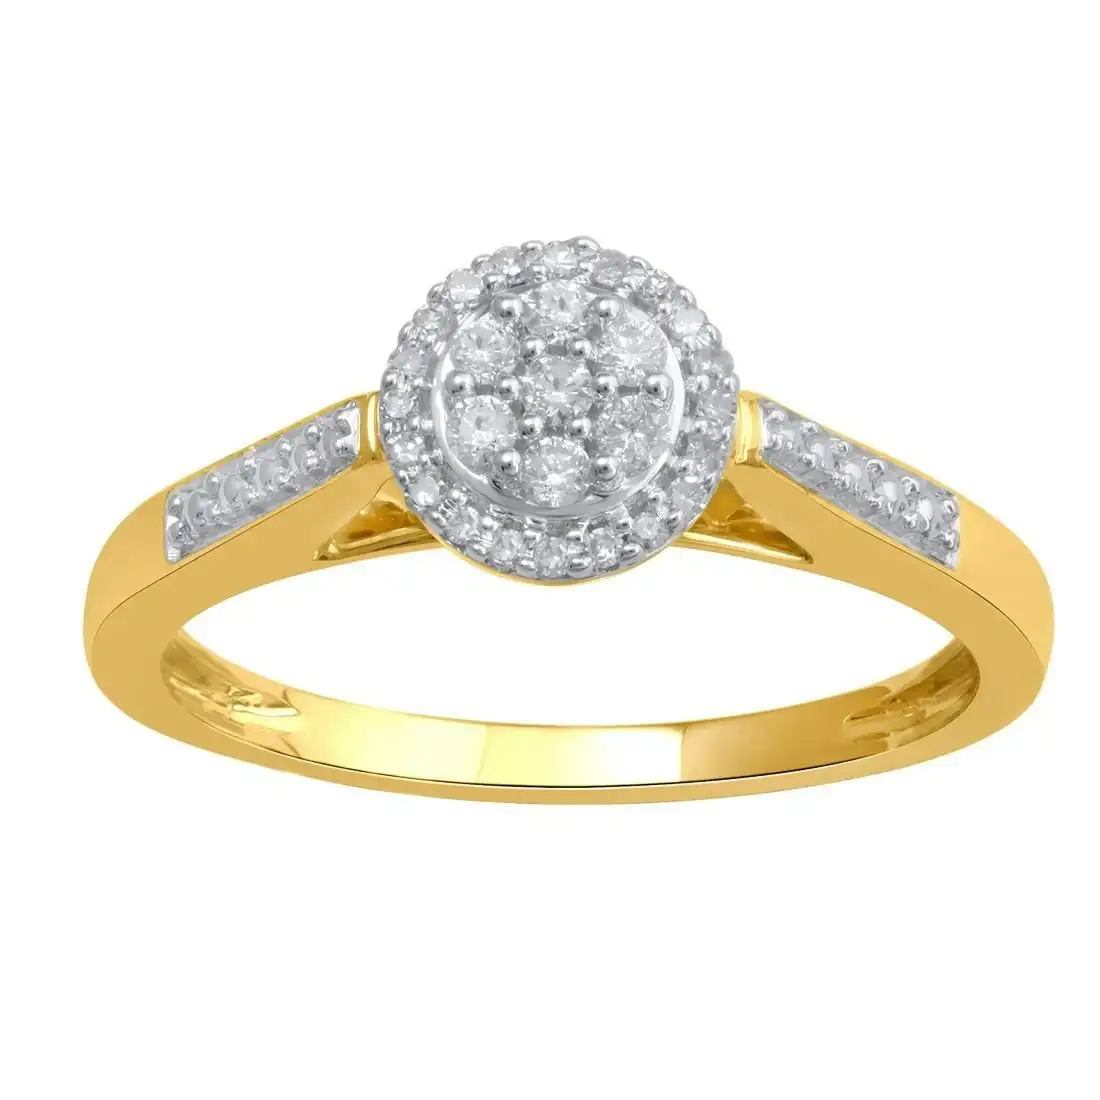 Brilliant Halo Surround Ring with 0.15ct of Diamonds in 9ct Yellow Gold